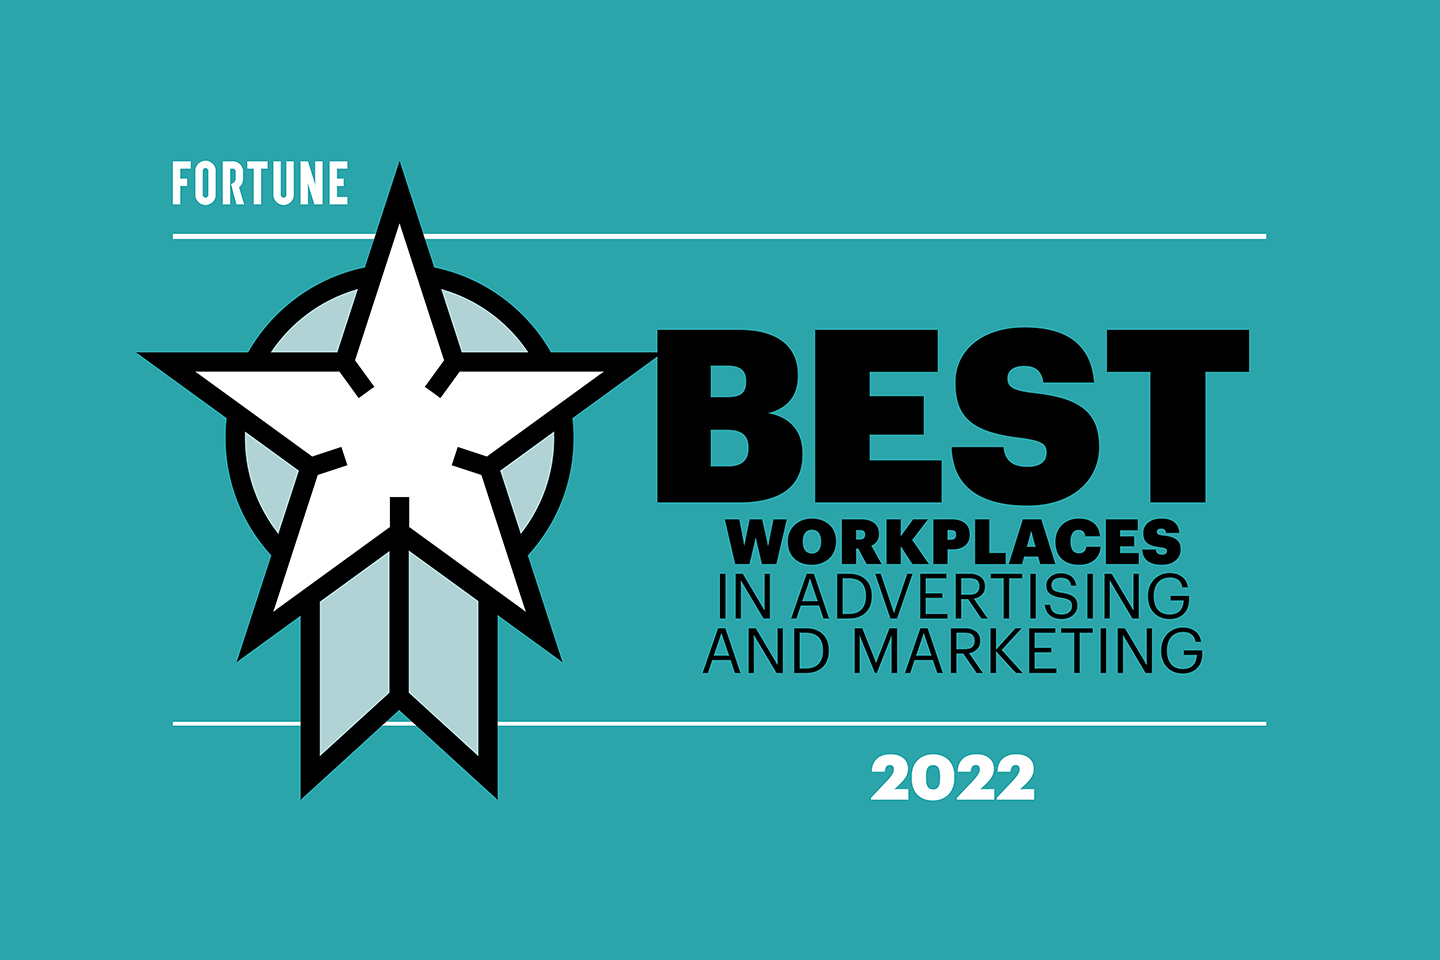 50 Best Workplaces in Advertising and Marketing